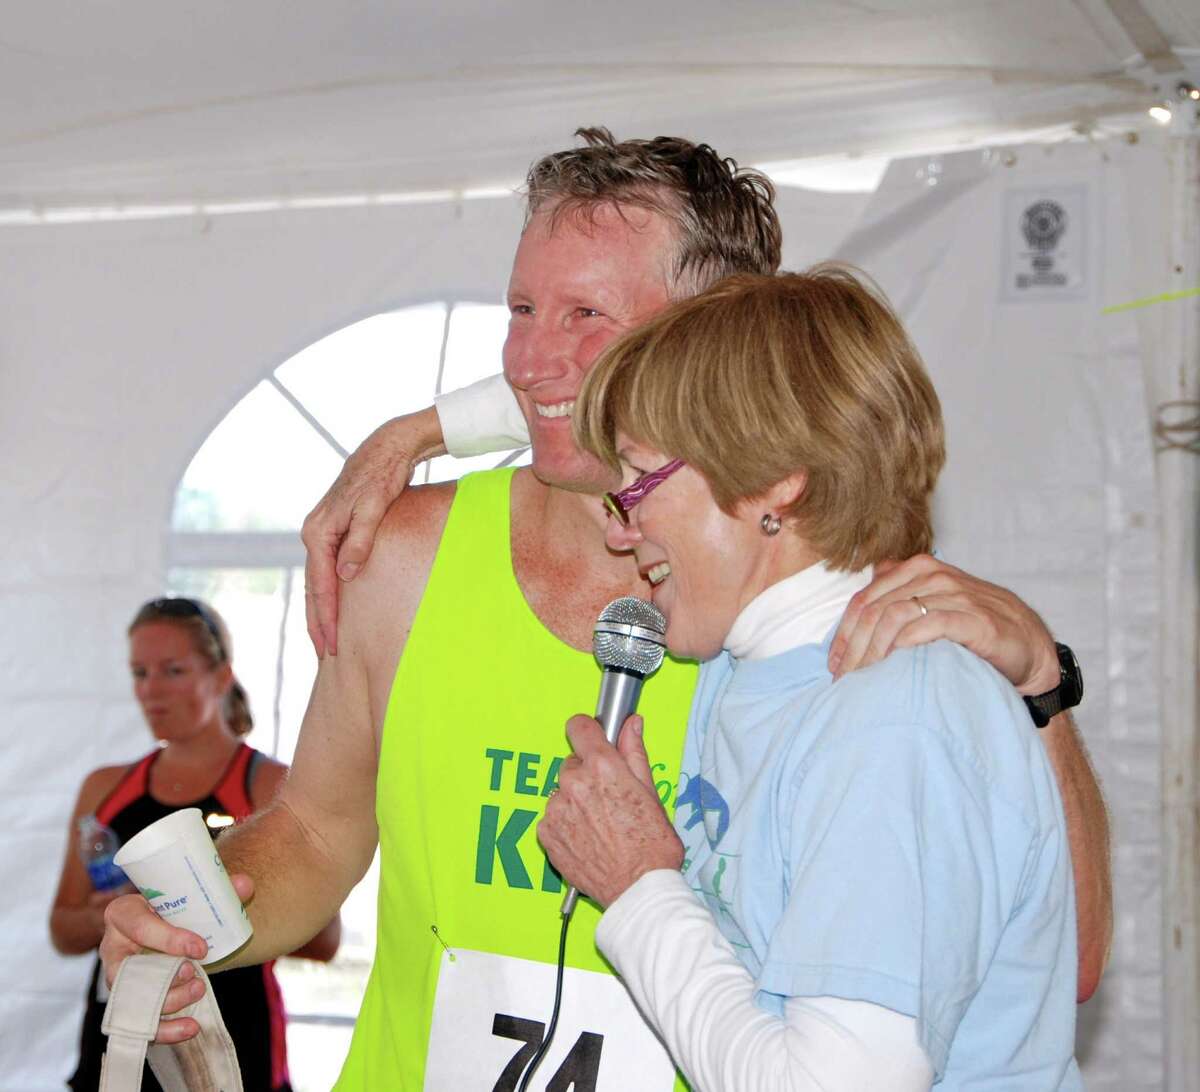 The Jim Fixx Award goes to noneother than his son, John Fixx, which Mary Green presented. The Jim Fixx Award, in honor of the author and running guru, is given to the individual who collects the most in contributions to the beneficiaries of the race. John Fixx raised over $2500 running to the top of the Empire State Building, benefitting the Bennet Cancer Center.